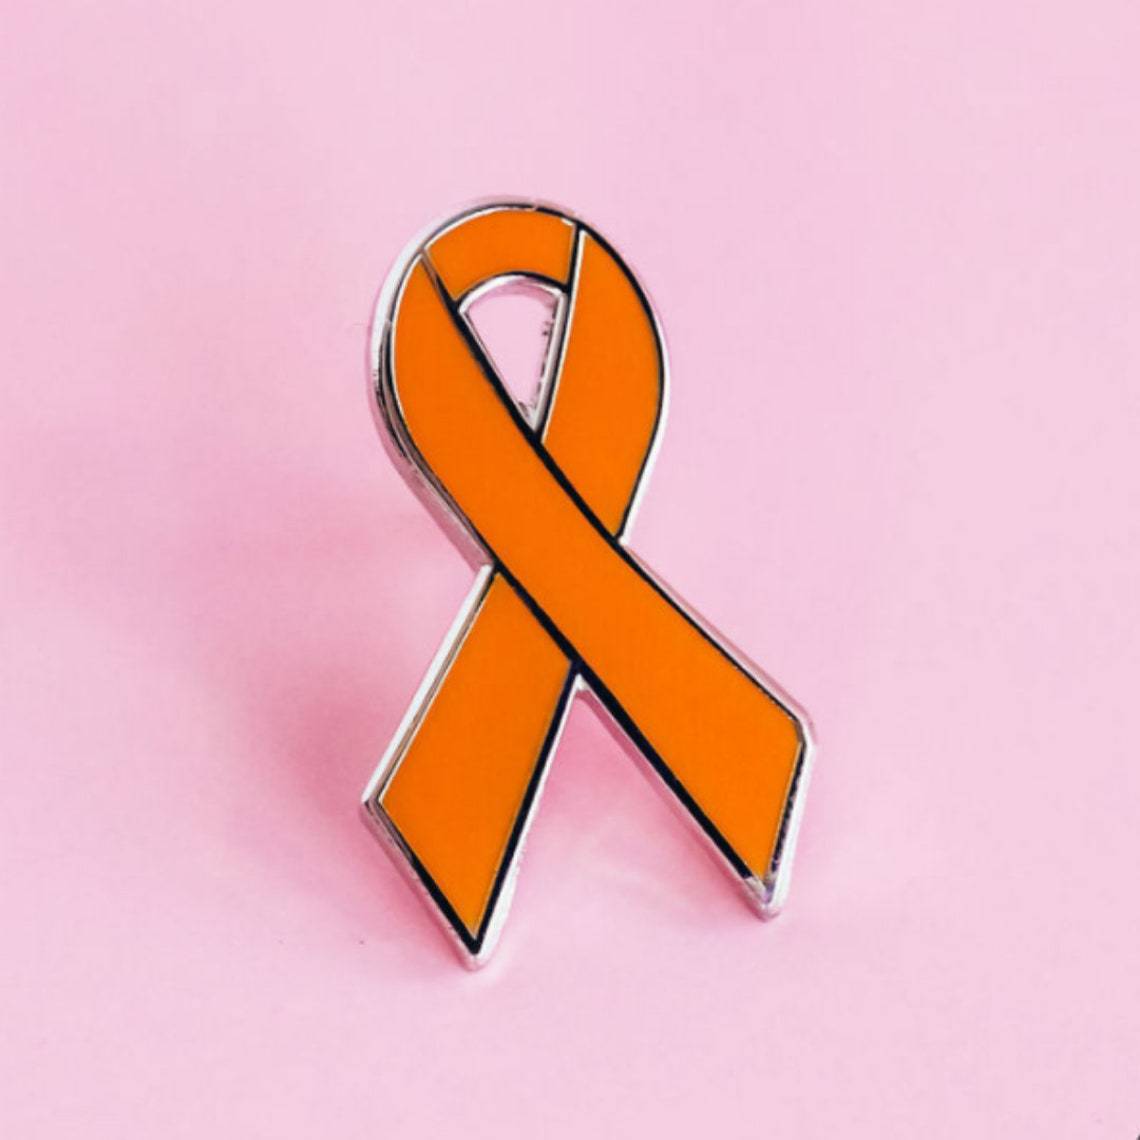 Buy an Orange Awareness Pin and Show Your Support